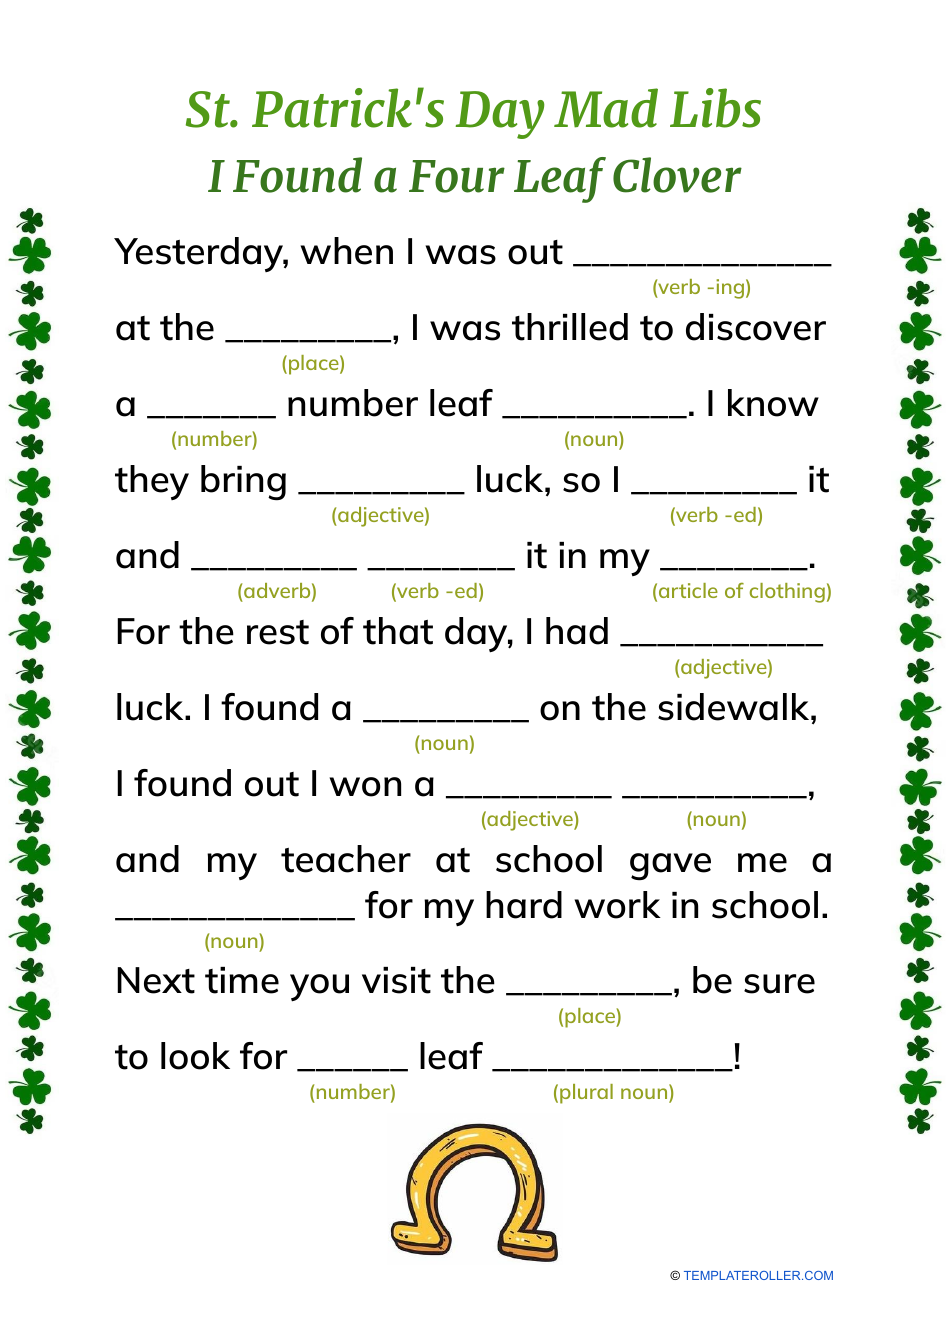 st-patrick-s-day-mad-libs-four-leaf-clover-download-printable-pdf